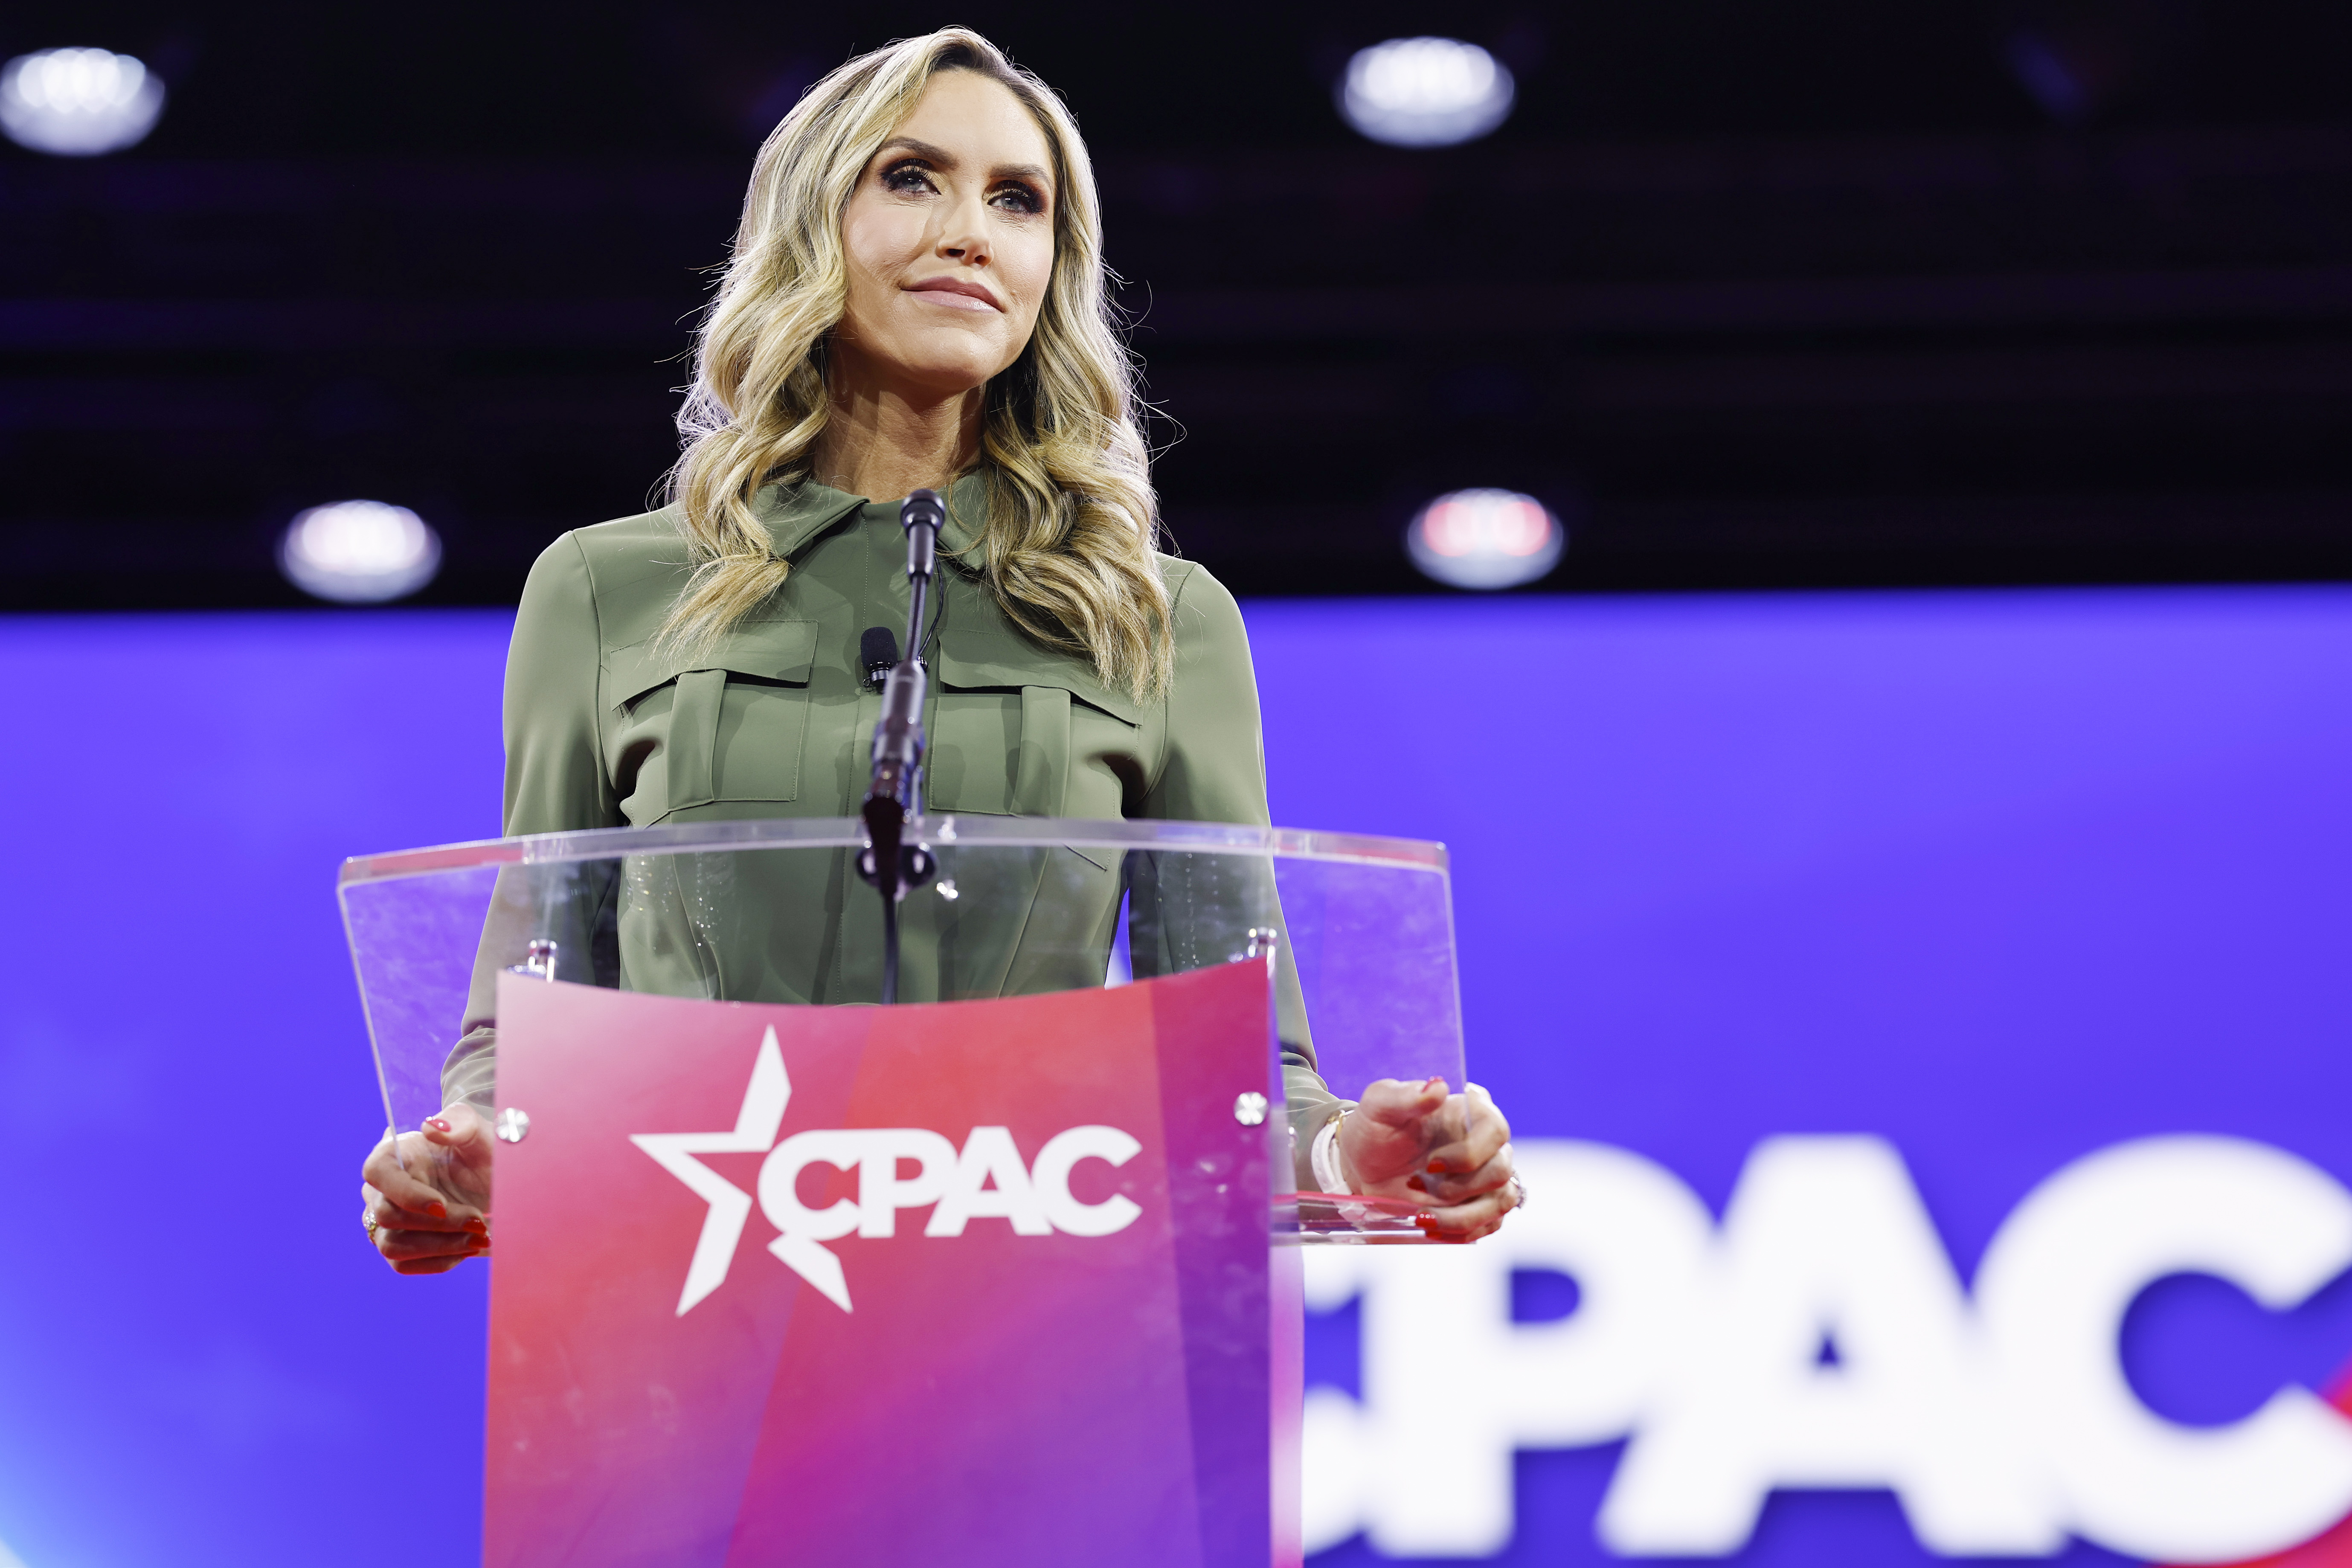 At CPAC, Lara Trump Vows Most Secure Election Operations Ever